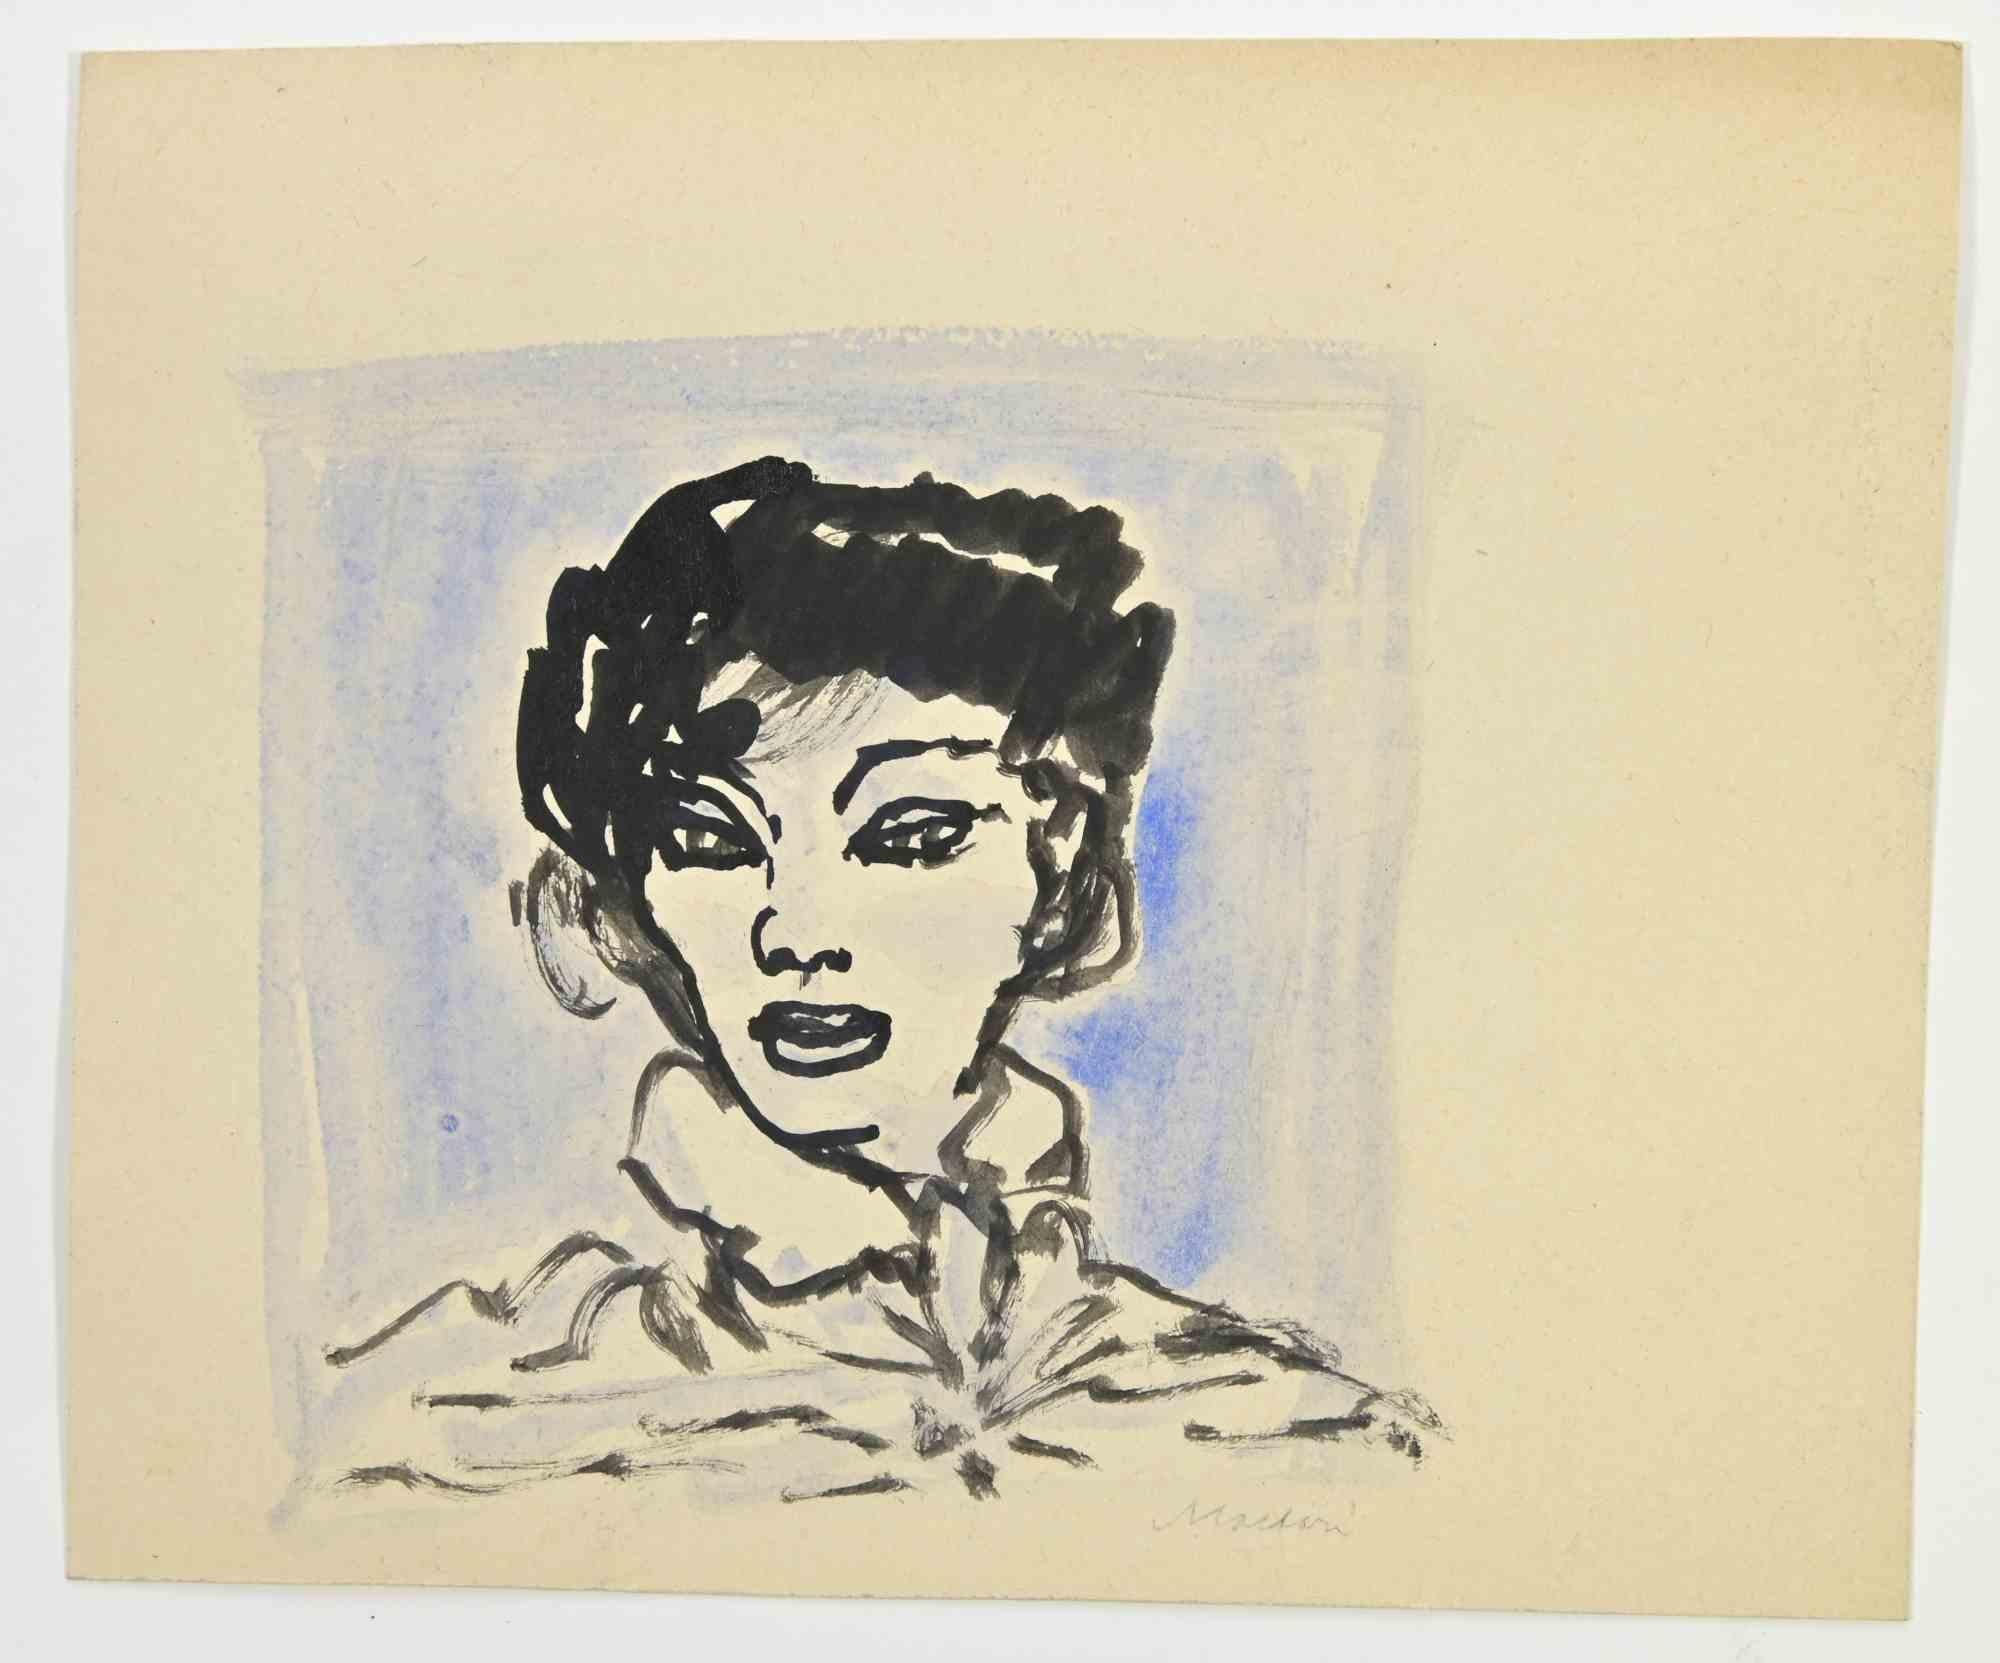 The Portrait is a Watercolor Drawing realized by Mino Maccari  (1924-1989) in the 1960s.

Hand-signed on the lower.

Good condition.

Mino Maccari (Siena, 1924-Rome, June 16, 1989) was an Italian writer, painter, engraver and journalist, winner of